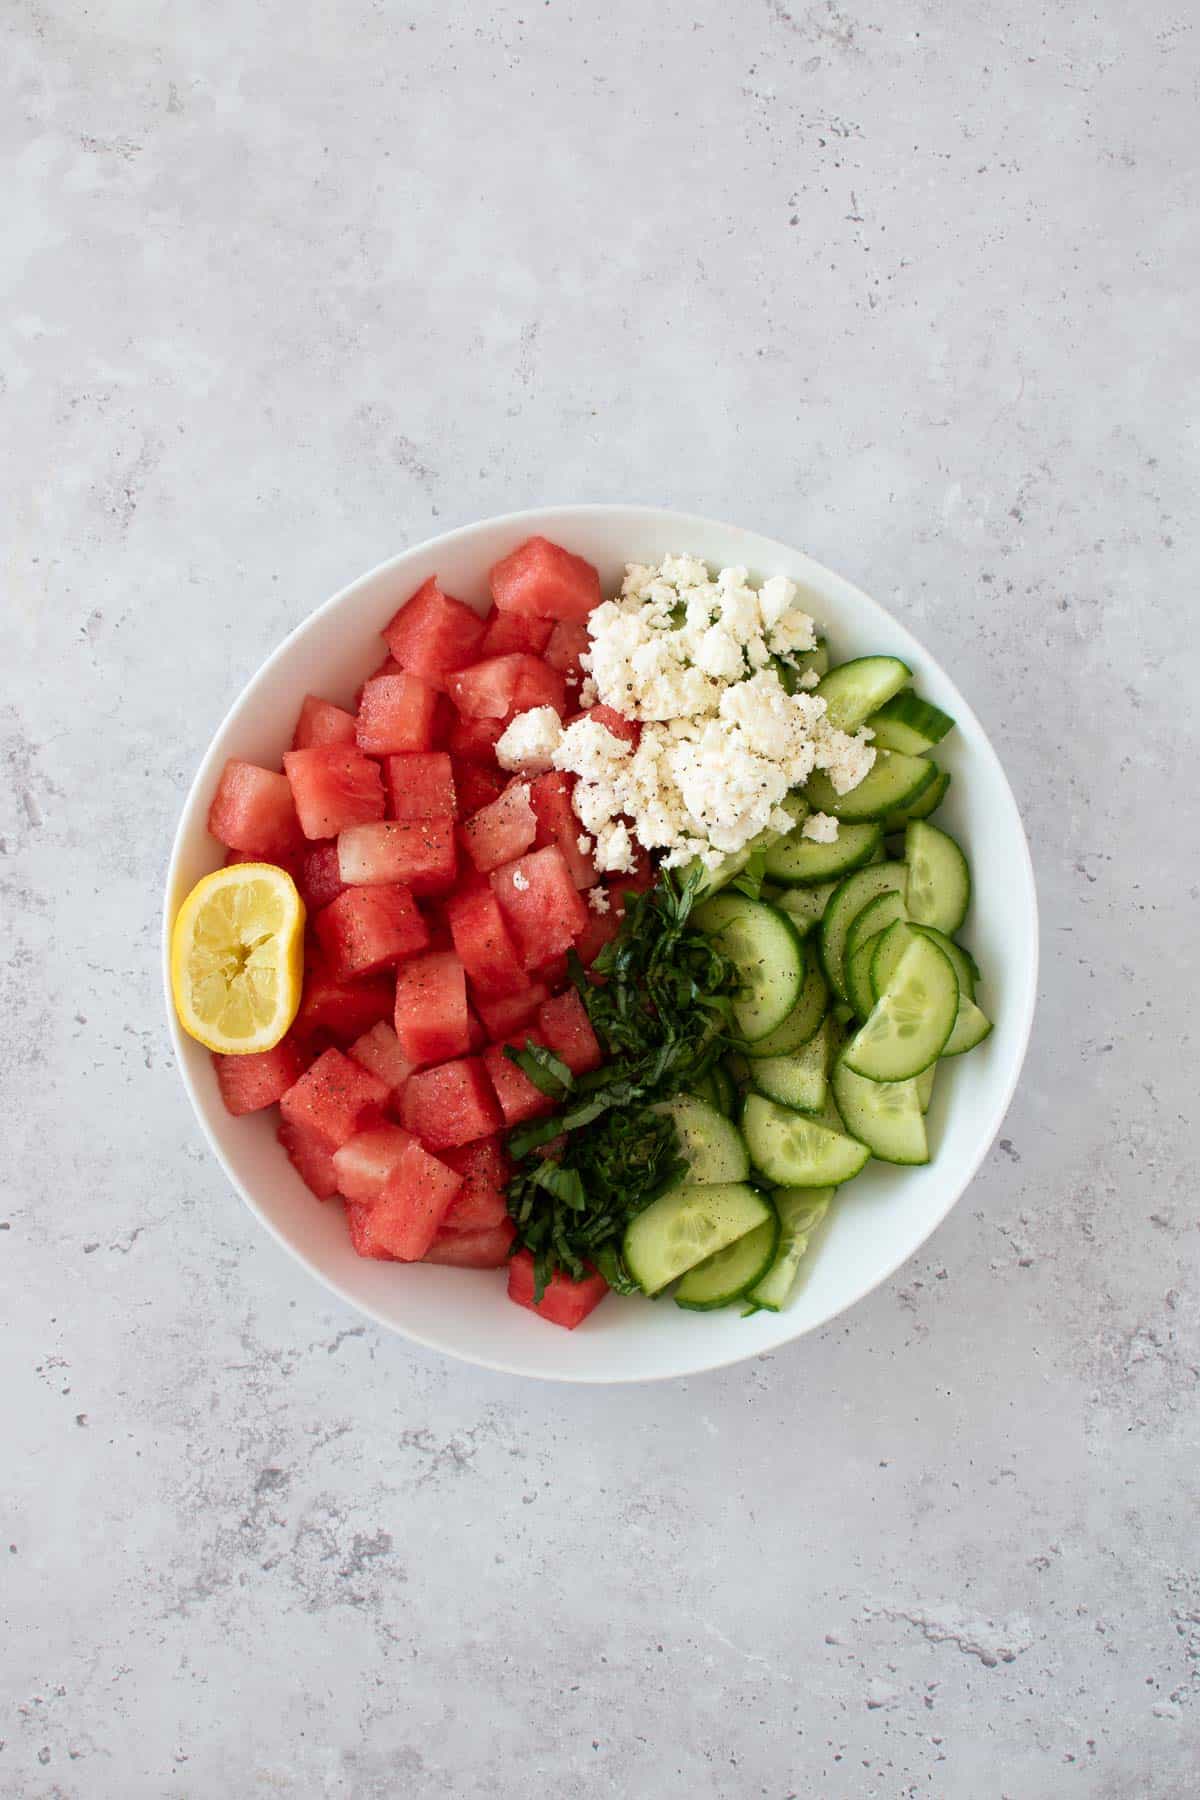 The watermelon salad ingredients added to a bowl.